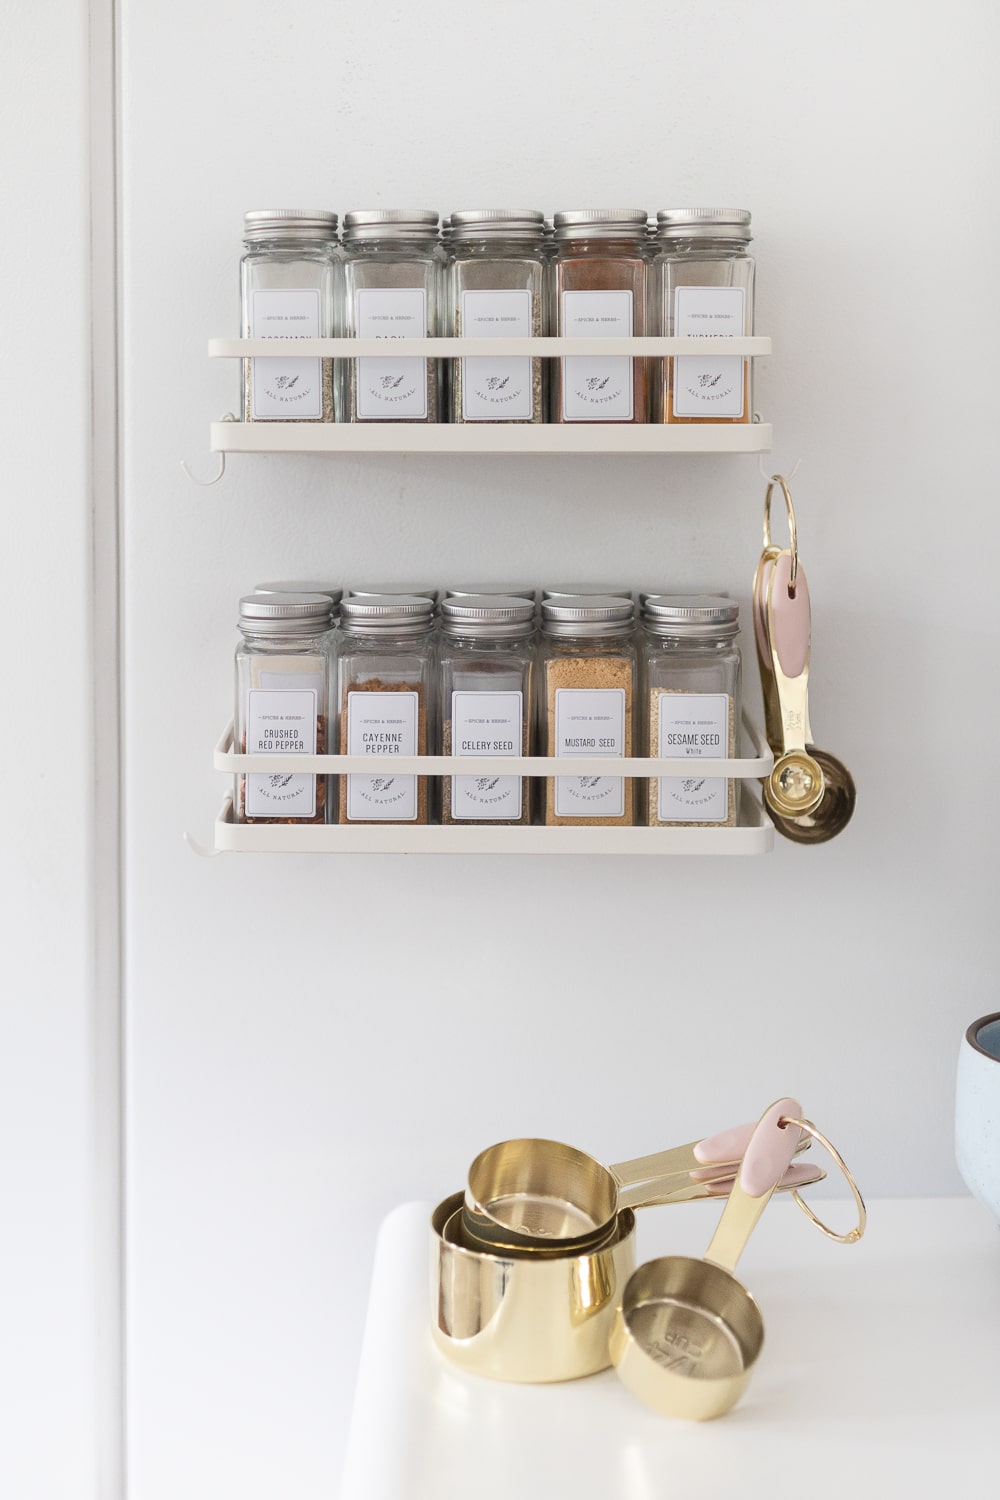 Blogger Stephanie Ziajka shares her magnetic spice jar organizer on Diary of a Debutante